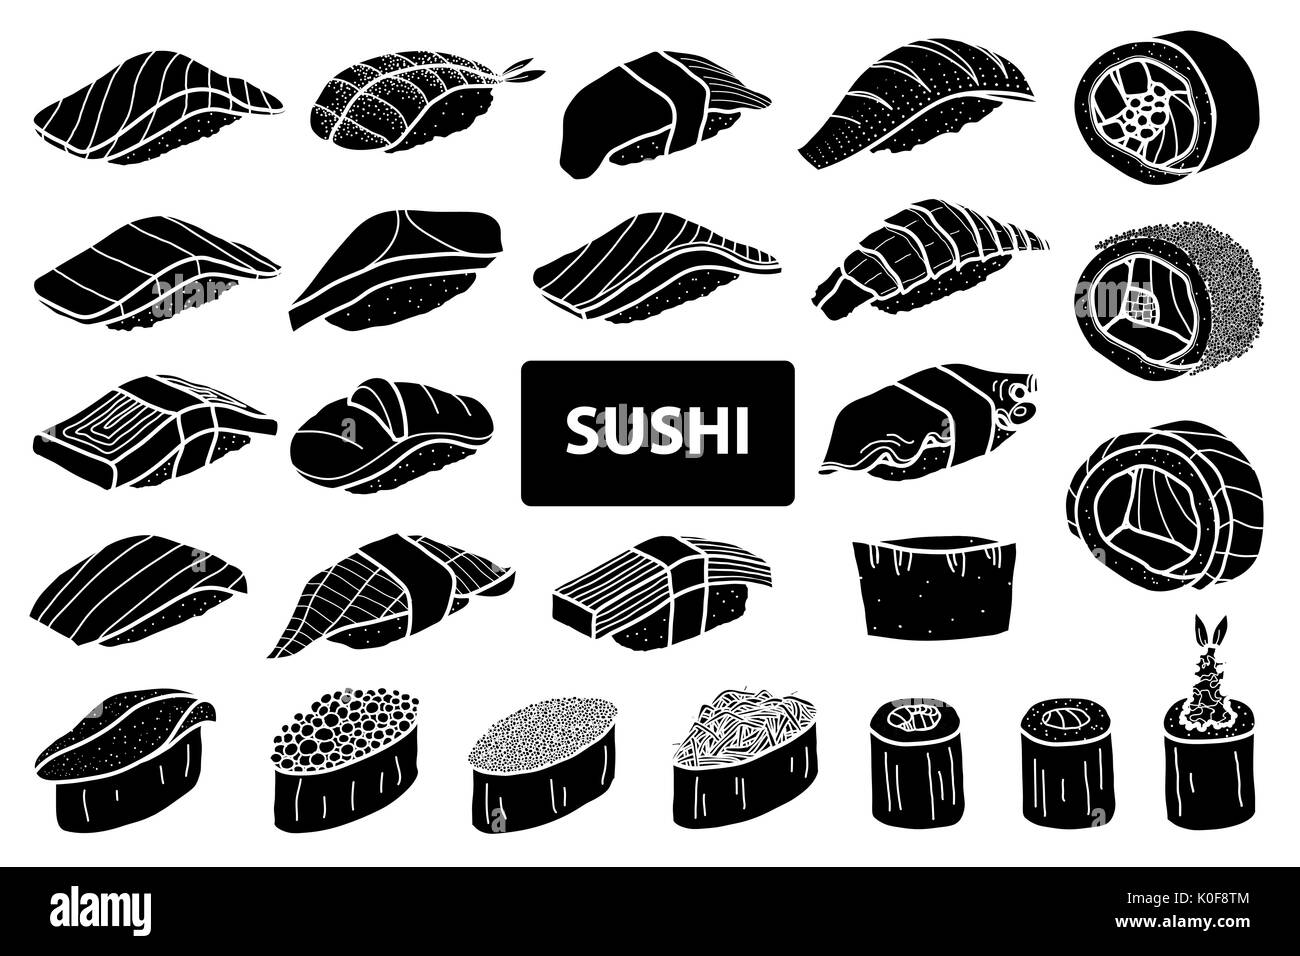 Set of 25 isolated silhouette sushi and roll. Cute japanese food illustration hand drawn style. Stock Vector